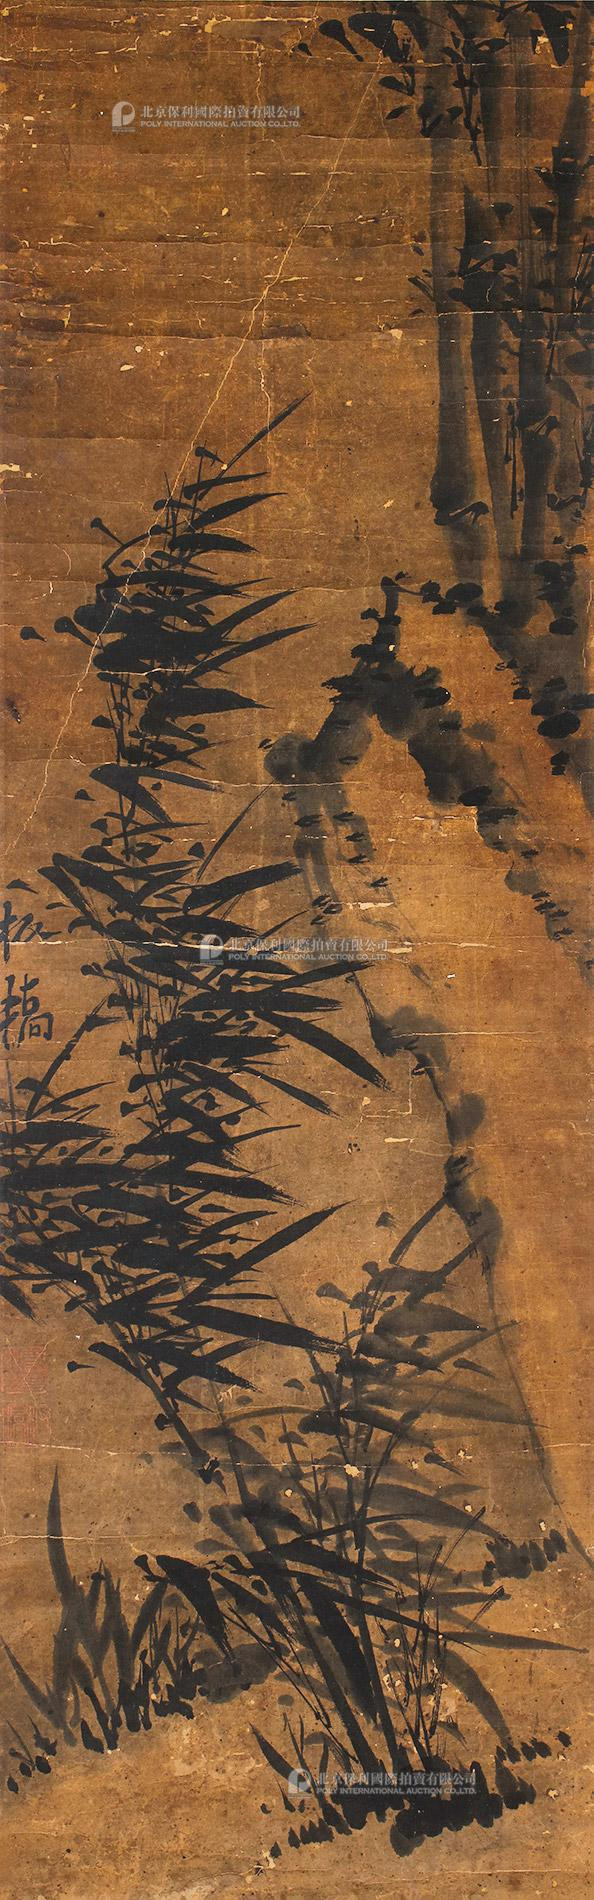 “Bamboo Forest” painted by Zheng Banqiao